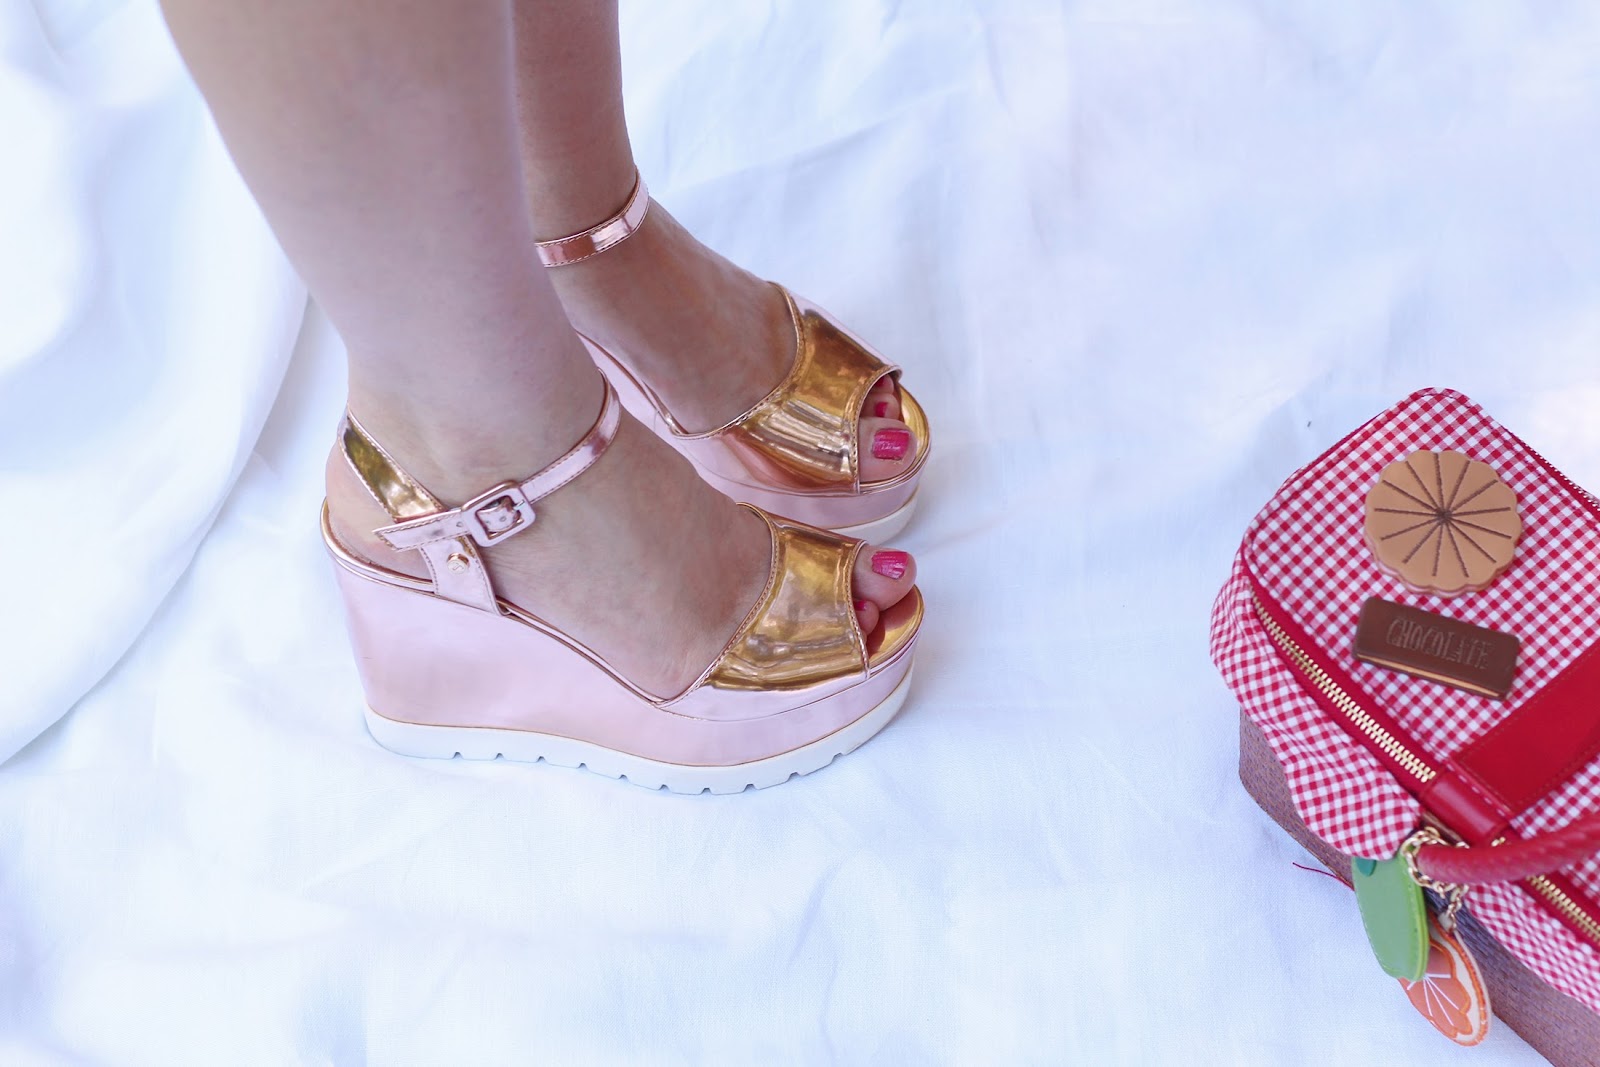 fashion style blogger outfit ootd italian girl italy trend vogue glamour pescara vestito cherry ciliegie chic wish summer estate zeppe wedge shoes metallic rose gold Tata borsa particolare cestino pic nic bag Accessorize